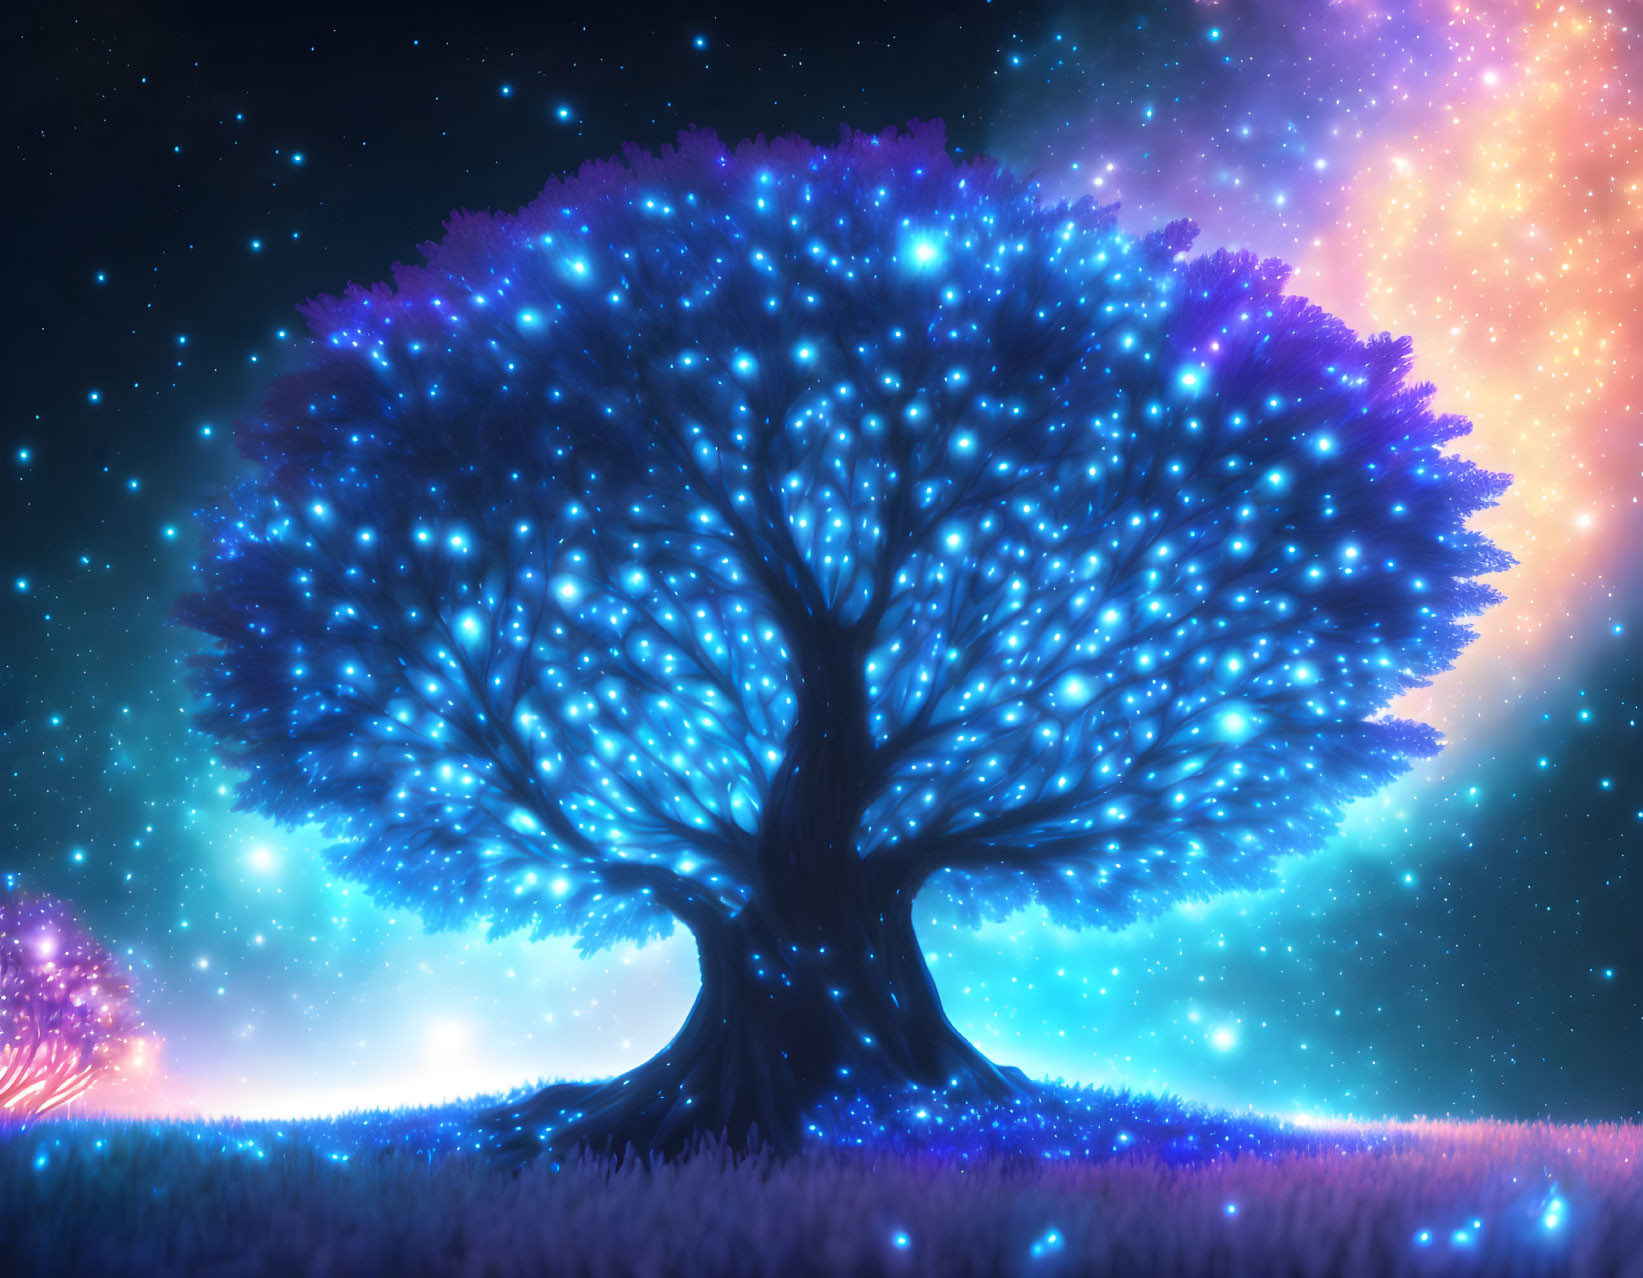 Vibrant digital artwork of glowing tree with blue leaves on cosmic background